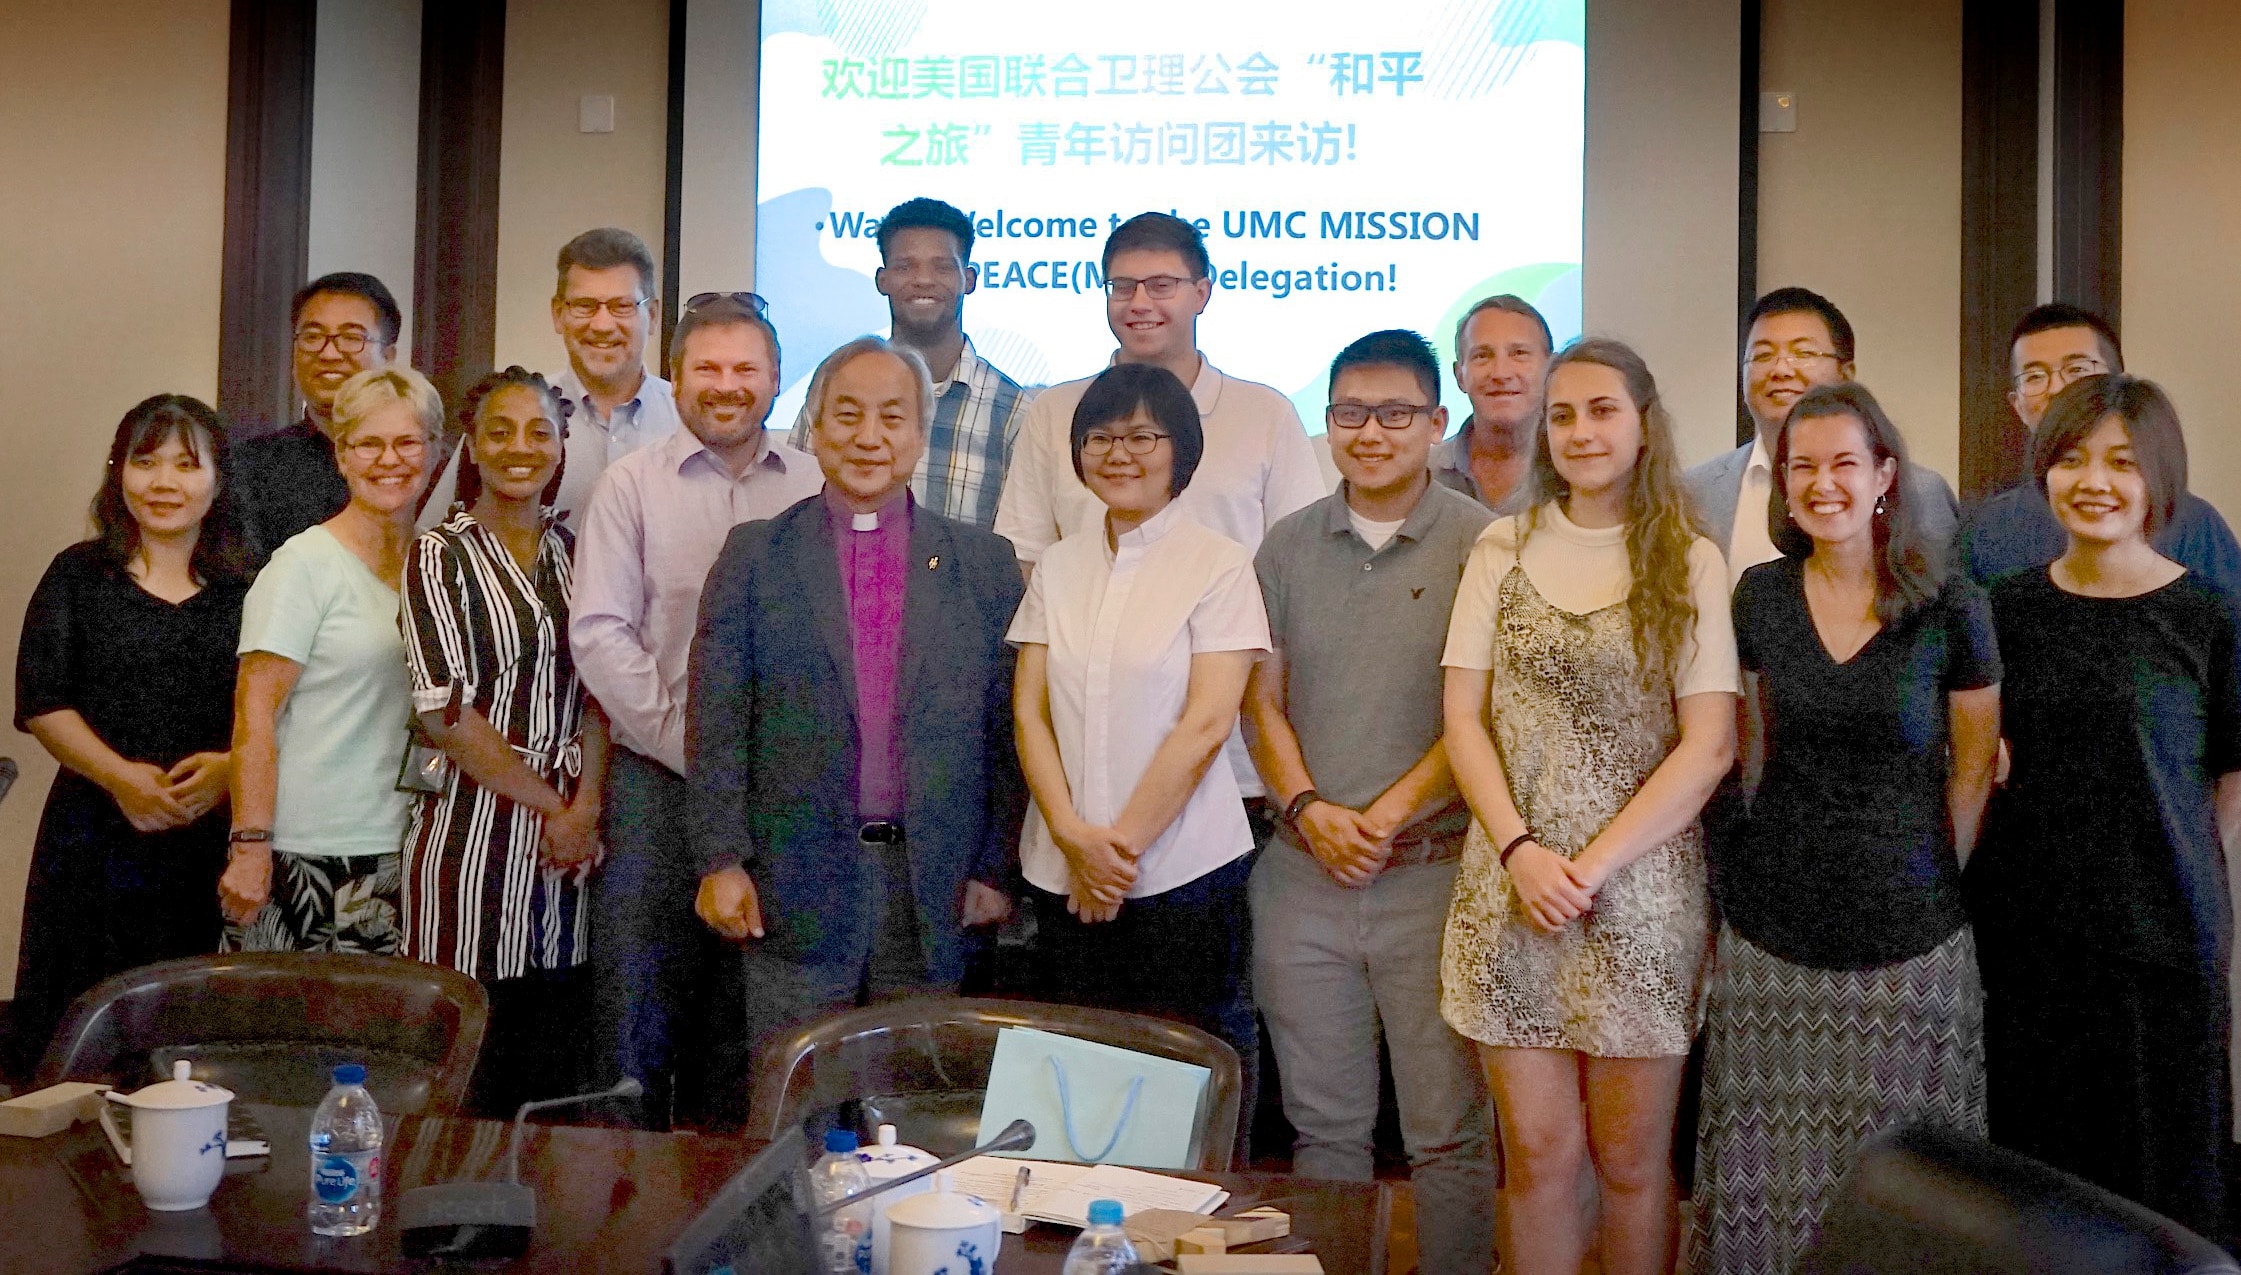 The United Methodist Volunteers in Mission team, with their hosts at the China Christian Council in Shanghai. Their journey, known as “Discover… Mission China,” was led and organized by the Rev. David and Christy Newhouse of the Michigan Conference. Photo courtesy of the Rev. David Newhouse.